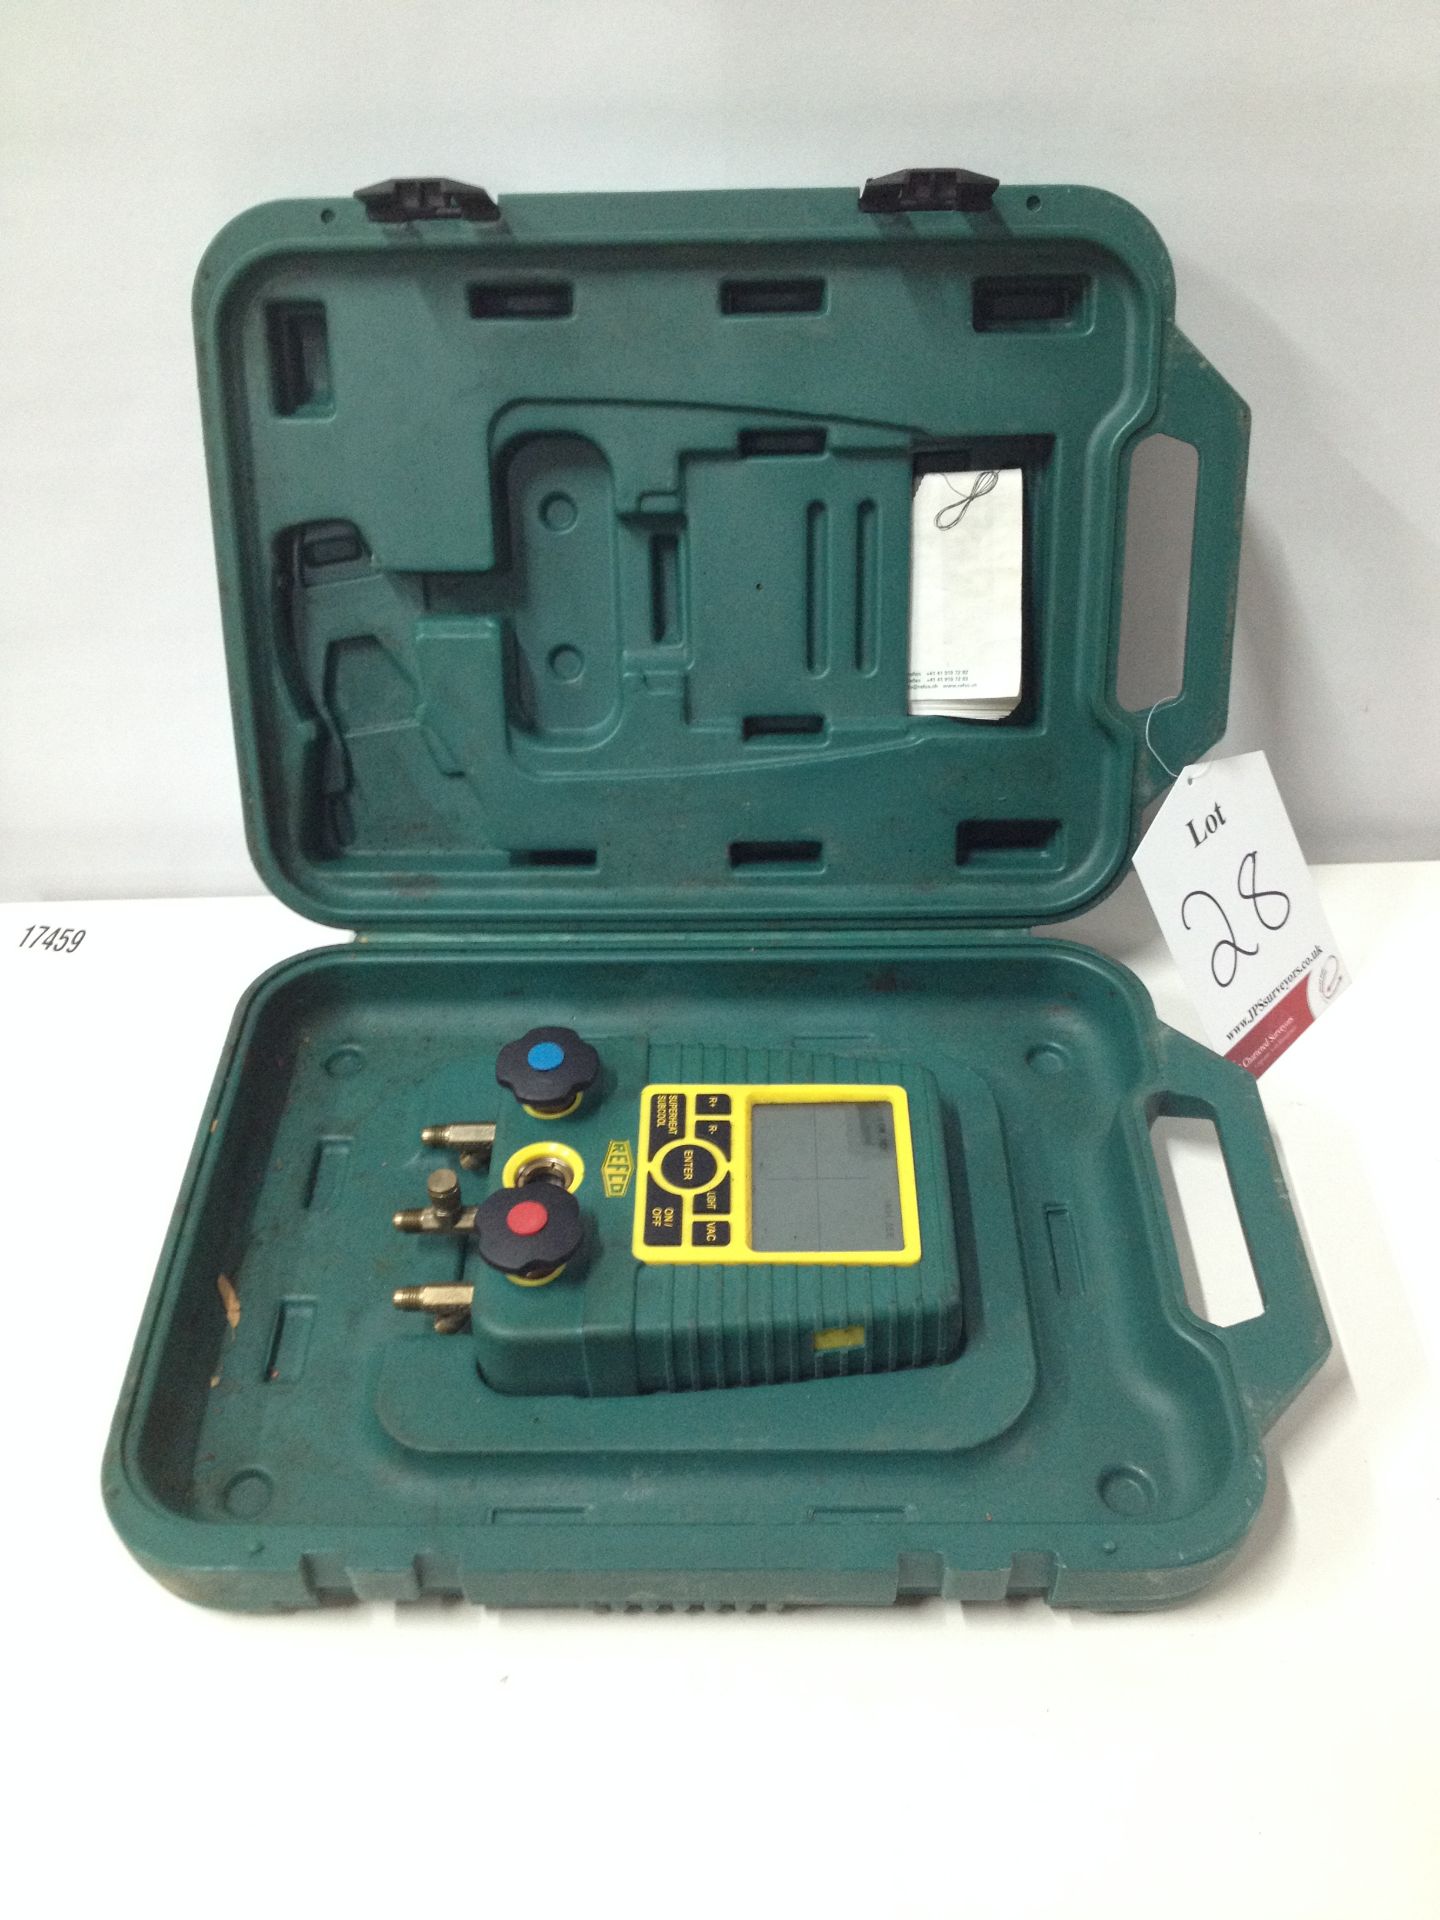 Refco Digimon 2/4 Way Mainfold (Charging Lines and Digimon Clamps missing) - Image 2 of 3